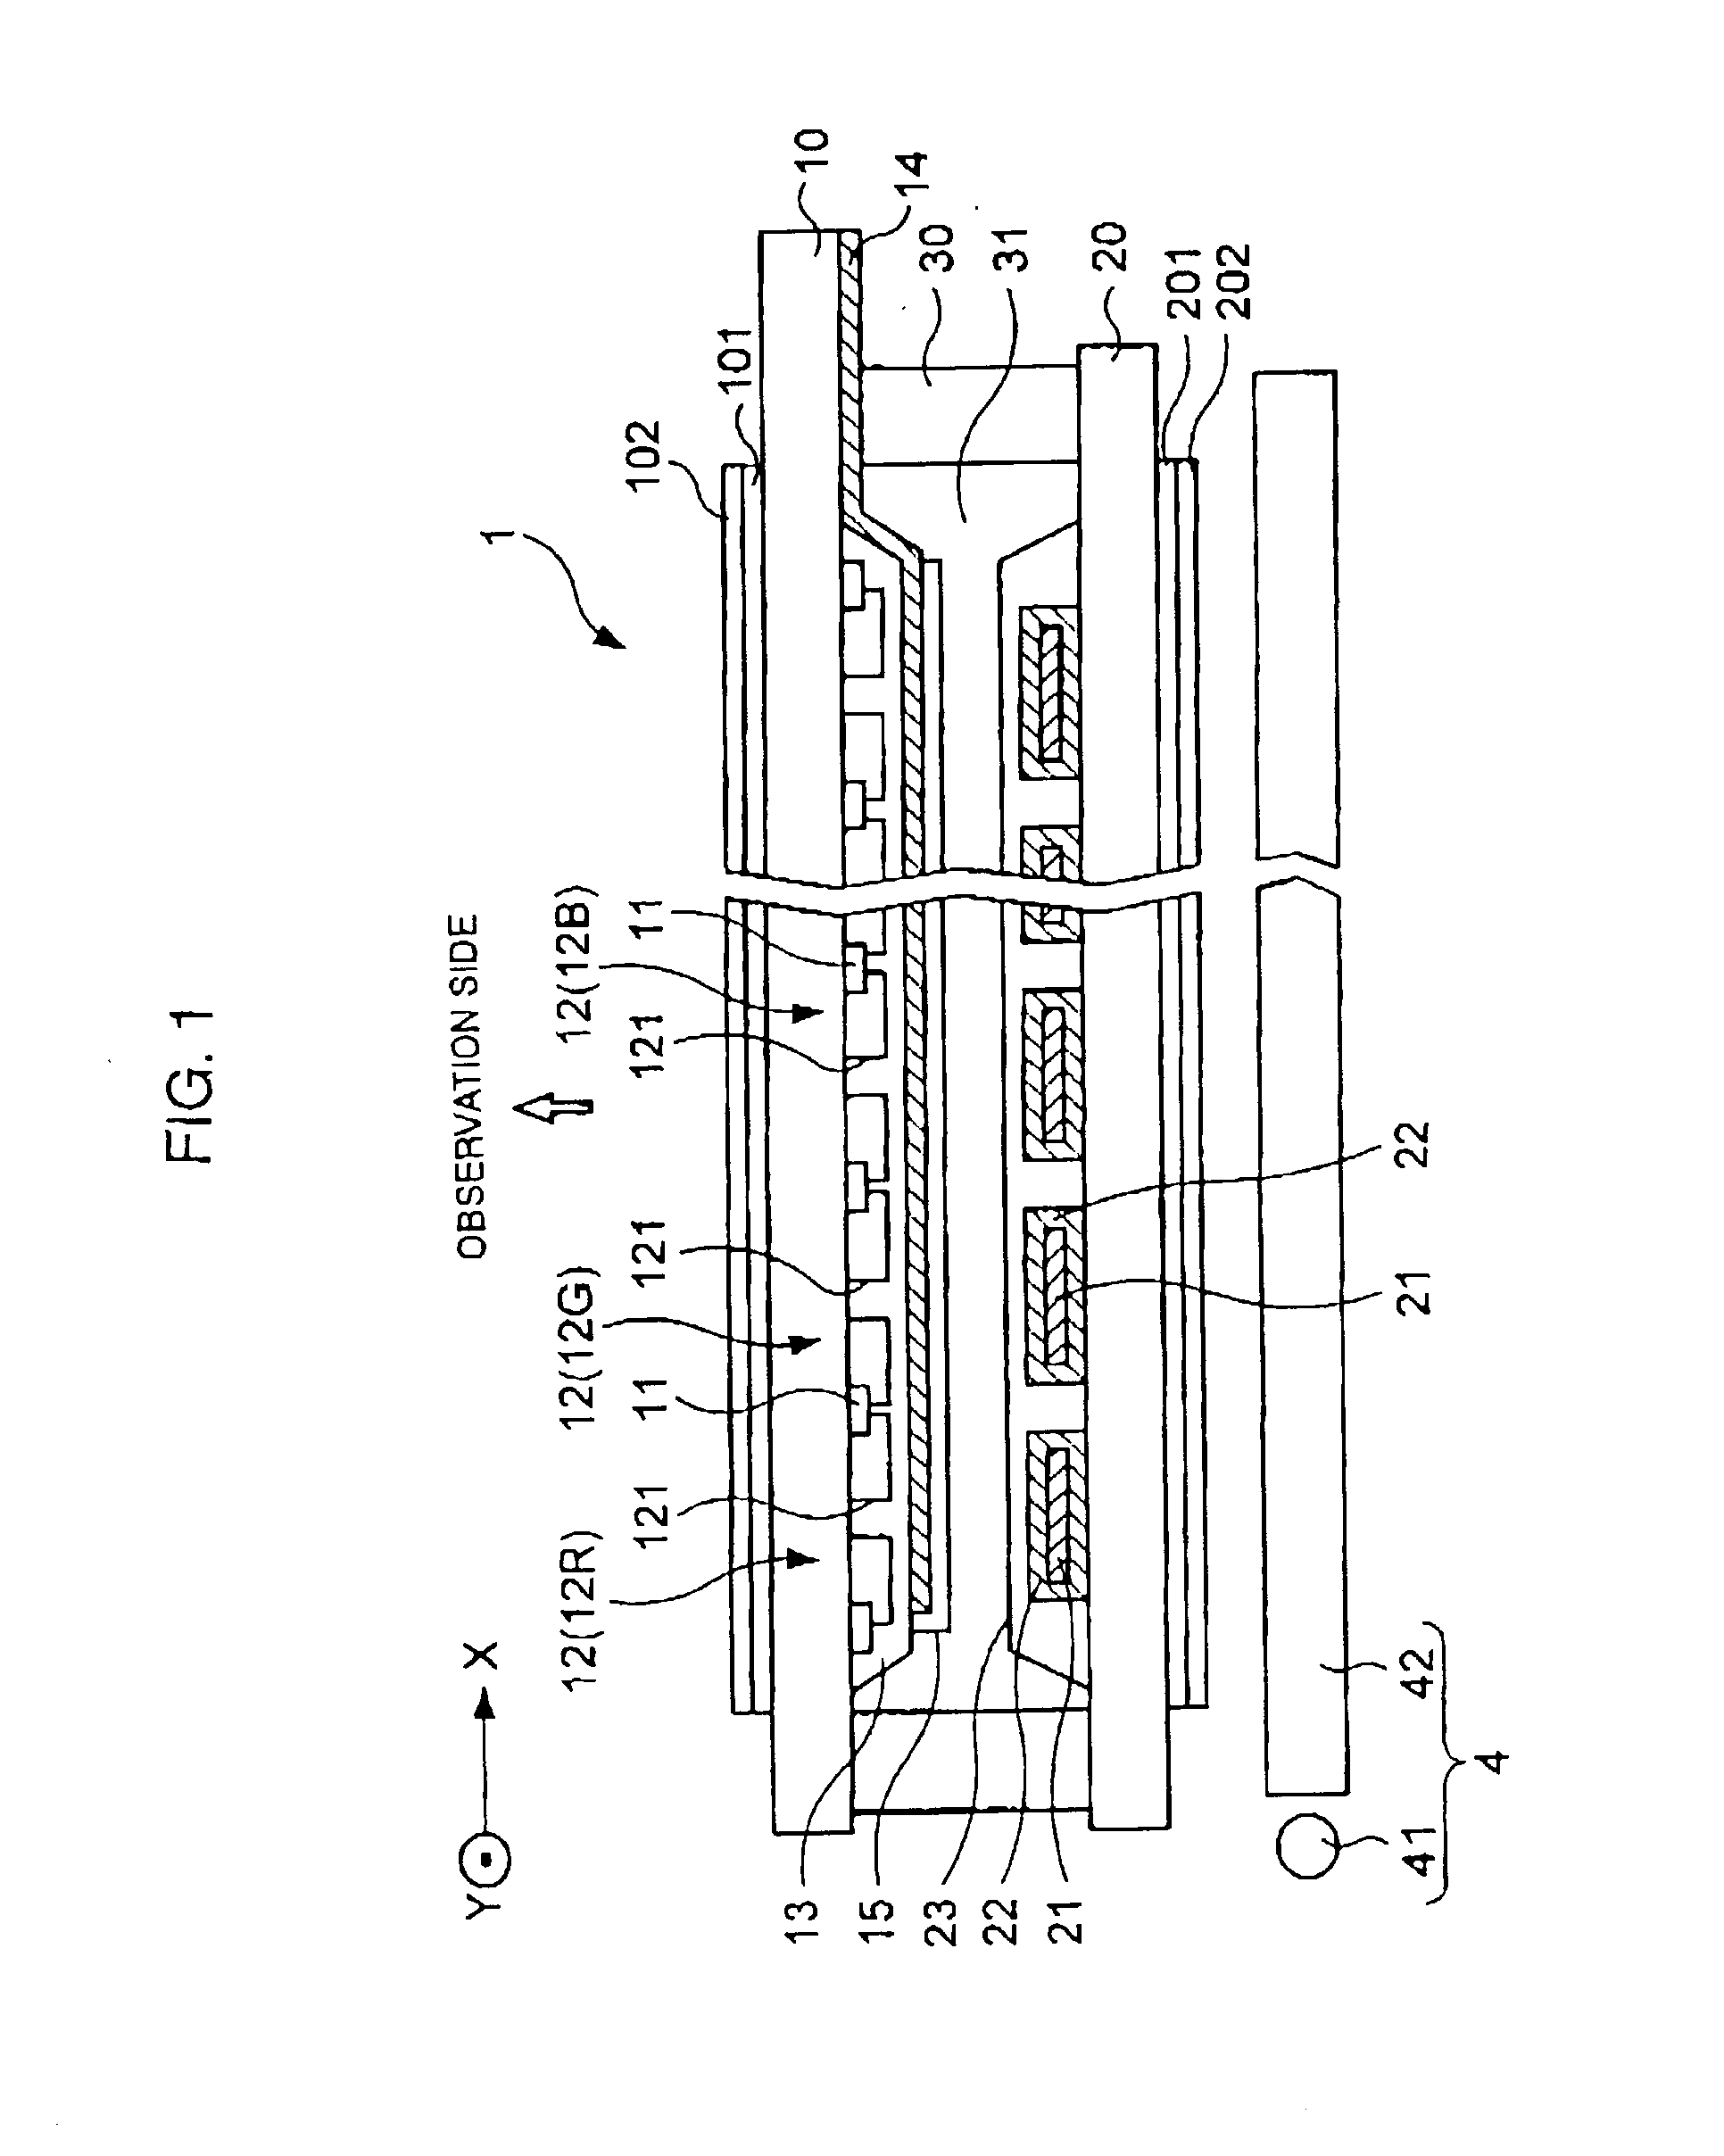 Liquid crystal display device, substrate assembly for liquid crystal display device, and electronic apparatus